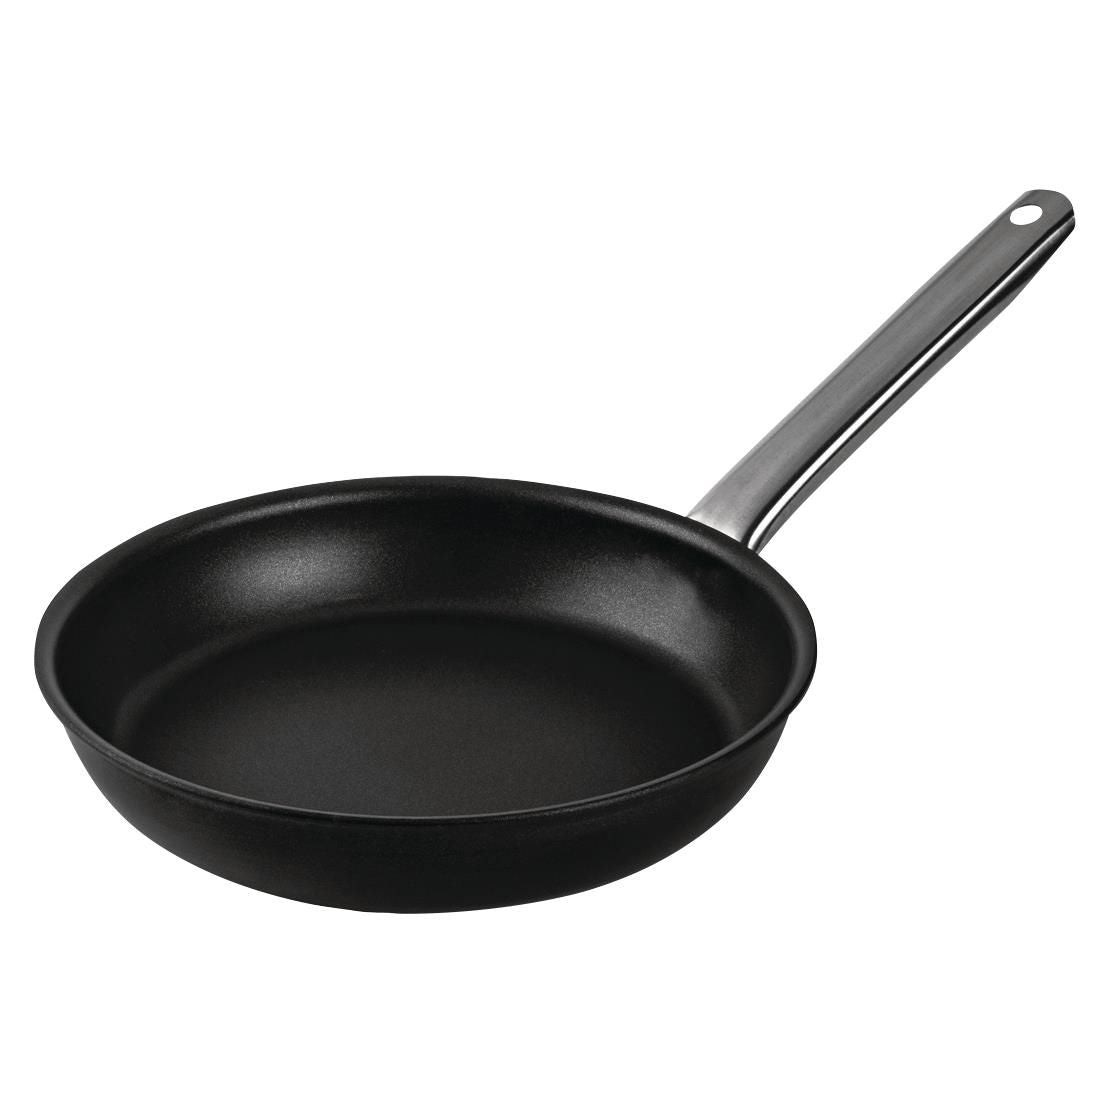 Bourgeat Elite Pro Non Stick Induction Frying Pan 240mm JD Catering Equipment Solutions Ltd